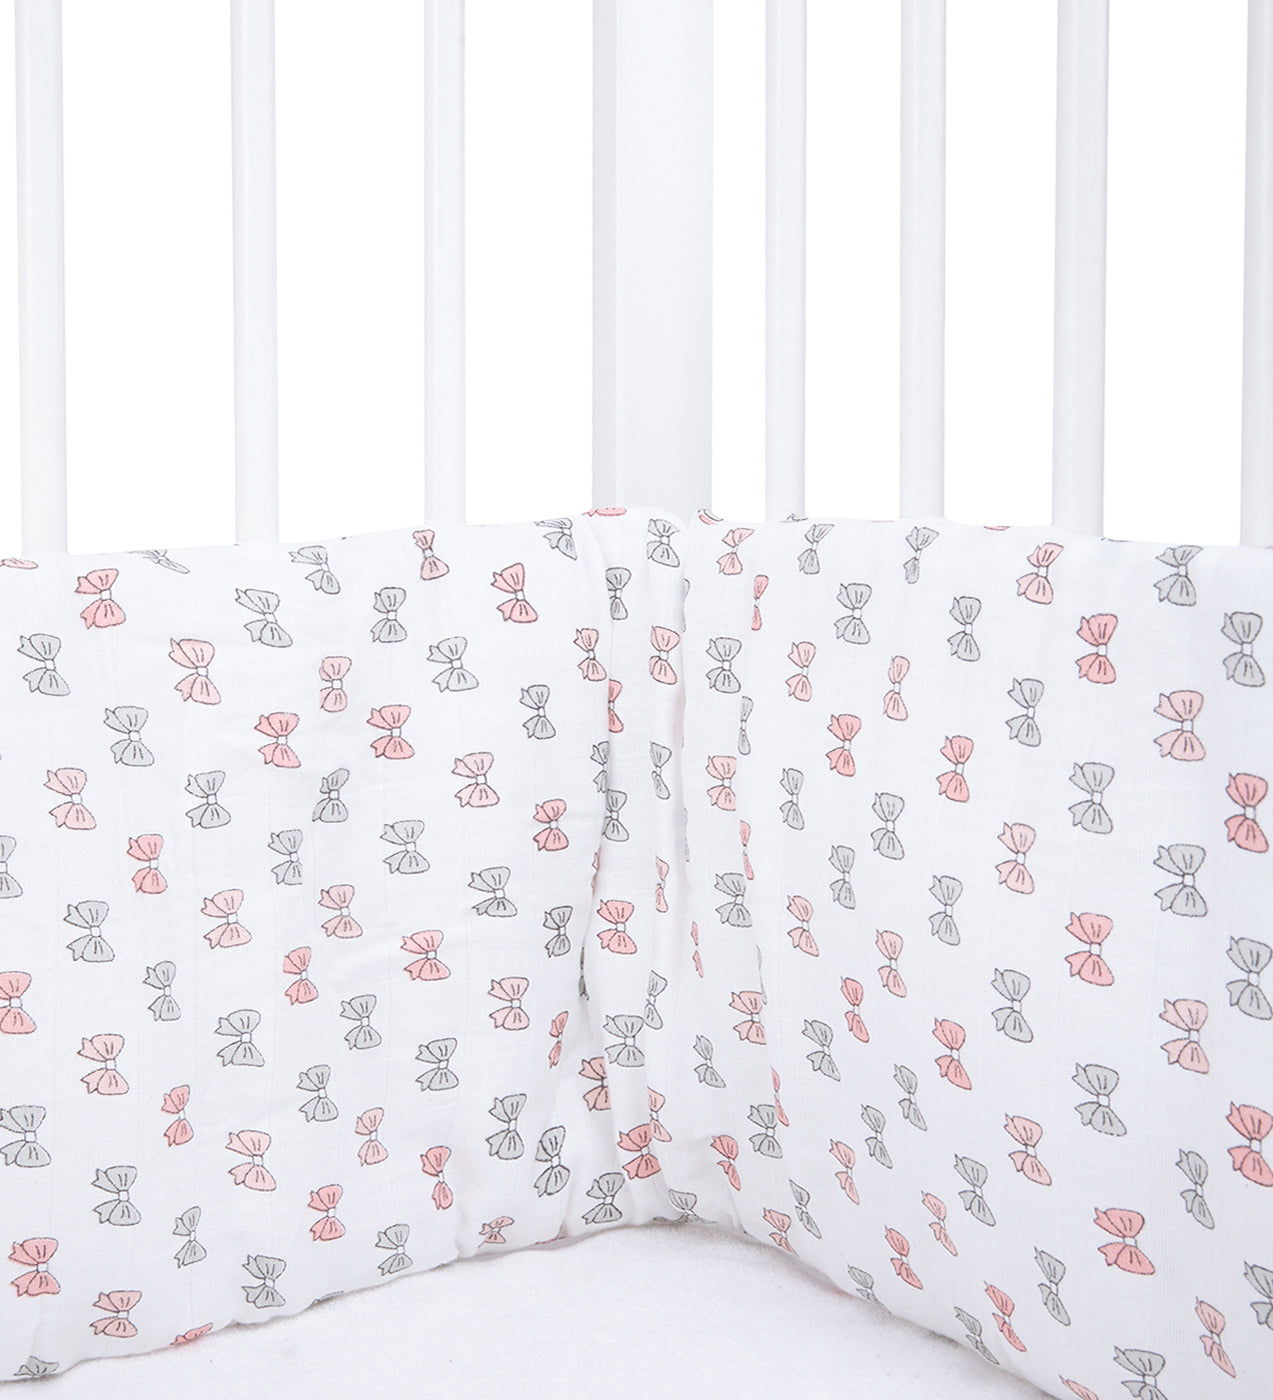 The White Cradle Baby Safe Cot Bumper Pad - Pink Bow